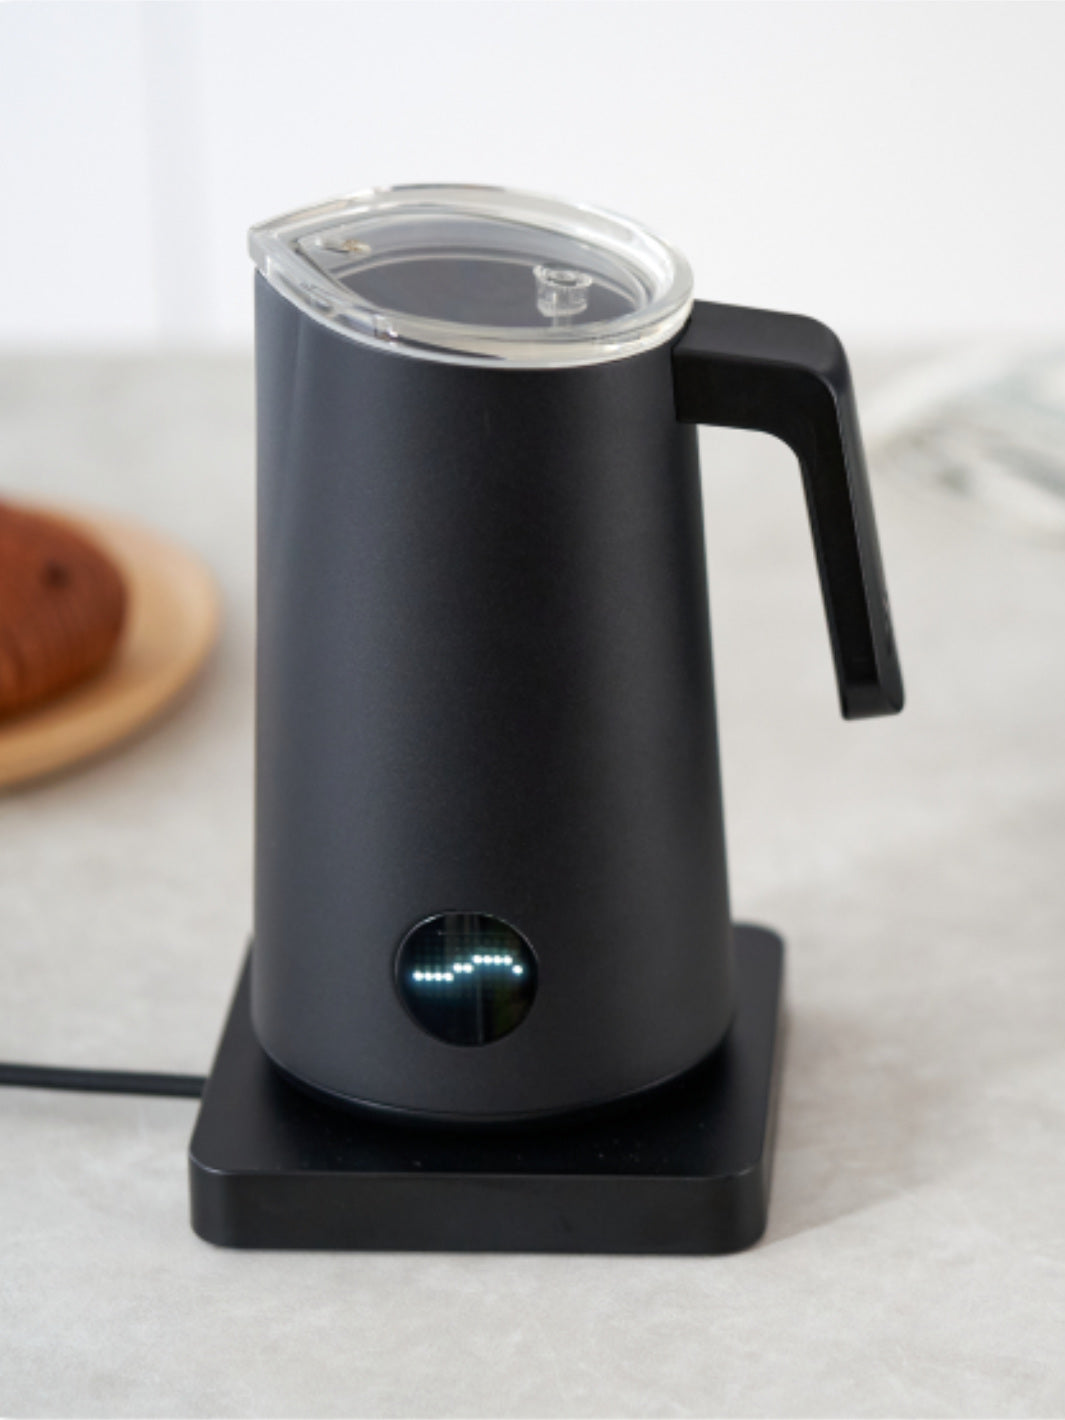 SUBMINIMAL NanoFoamer PRO / Milk Frothers | Eight Ounce Coffee